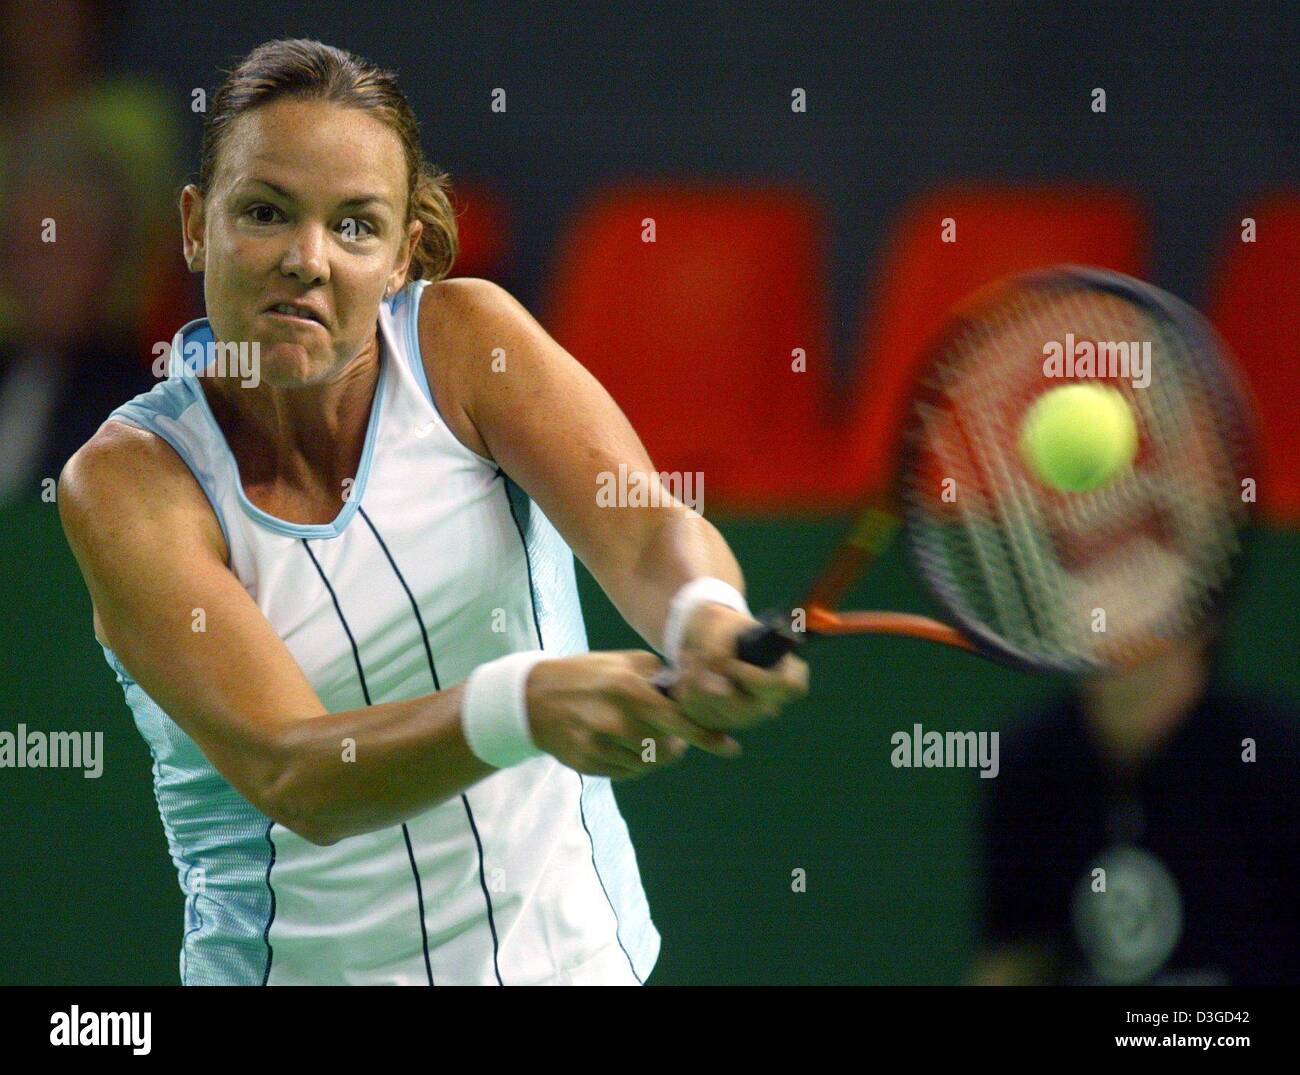 (dpa) - Lindsay Davenport from the USA hits a backhand during her match against Australian Alicia Molik at the Porsche Tennis Grand Prix in Filderstadt near Stuttgart, Germany, 6 October 2004. The prize of the WTA tournament, which runs until Sunday, 10 October, are 650,000 US dollars prize money and a sports car. Stock Photo